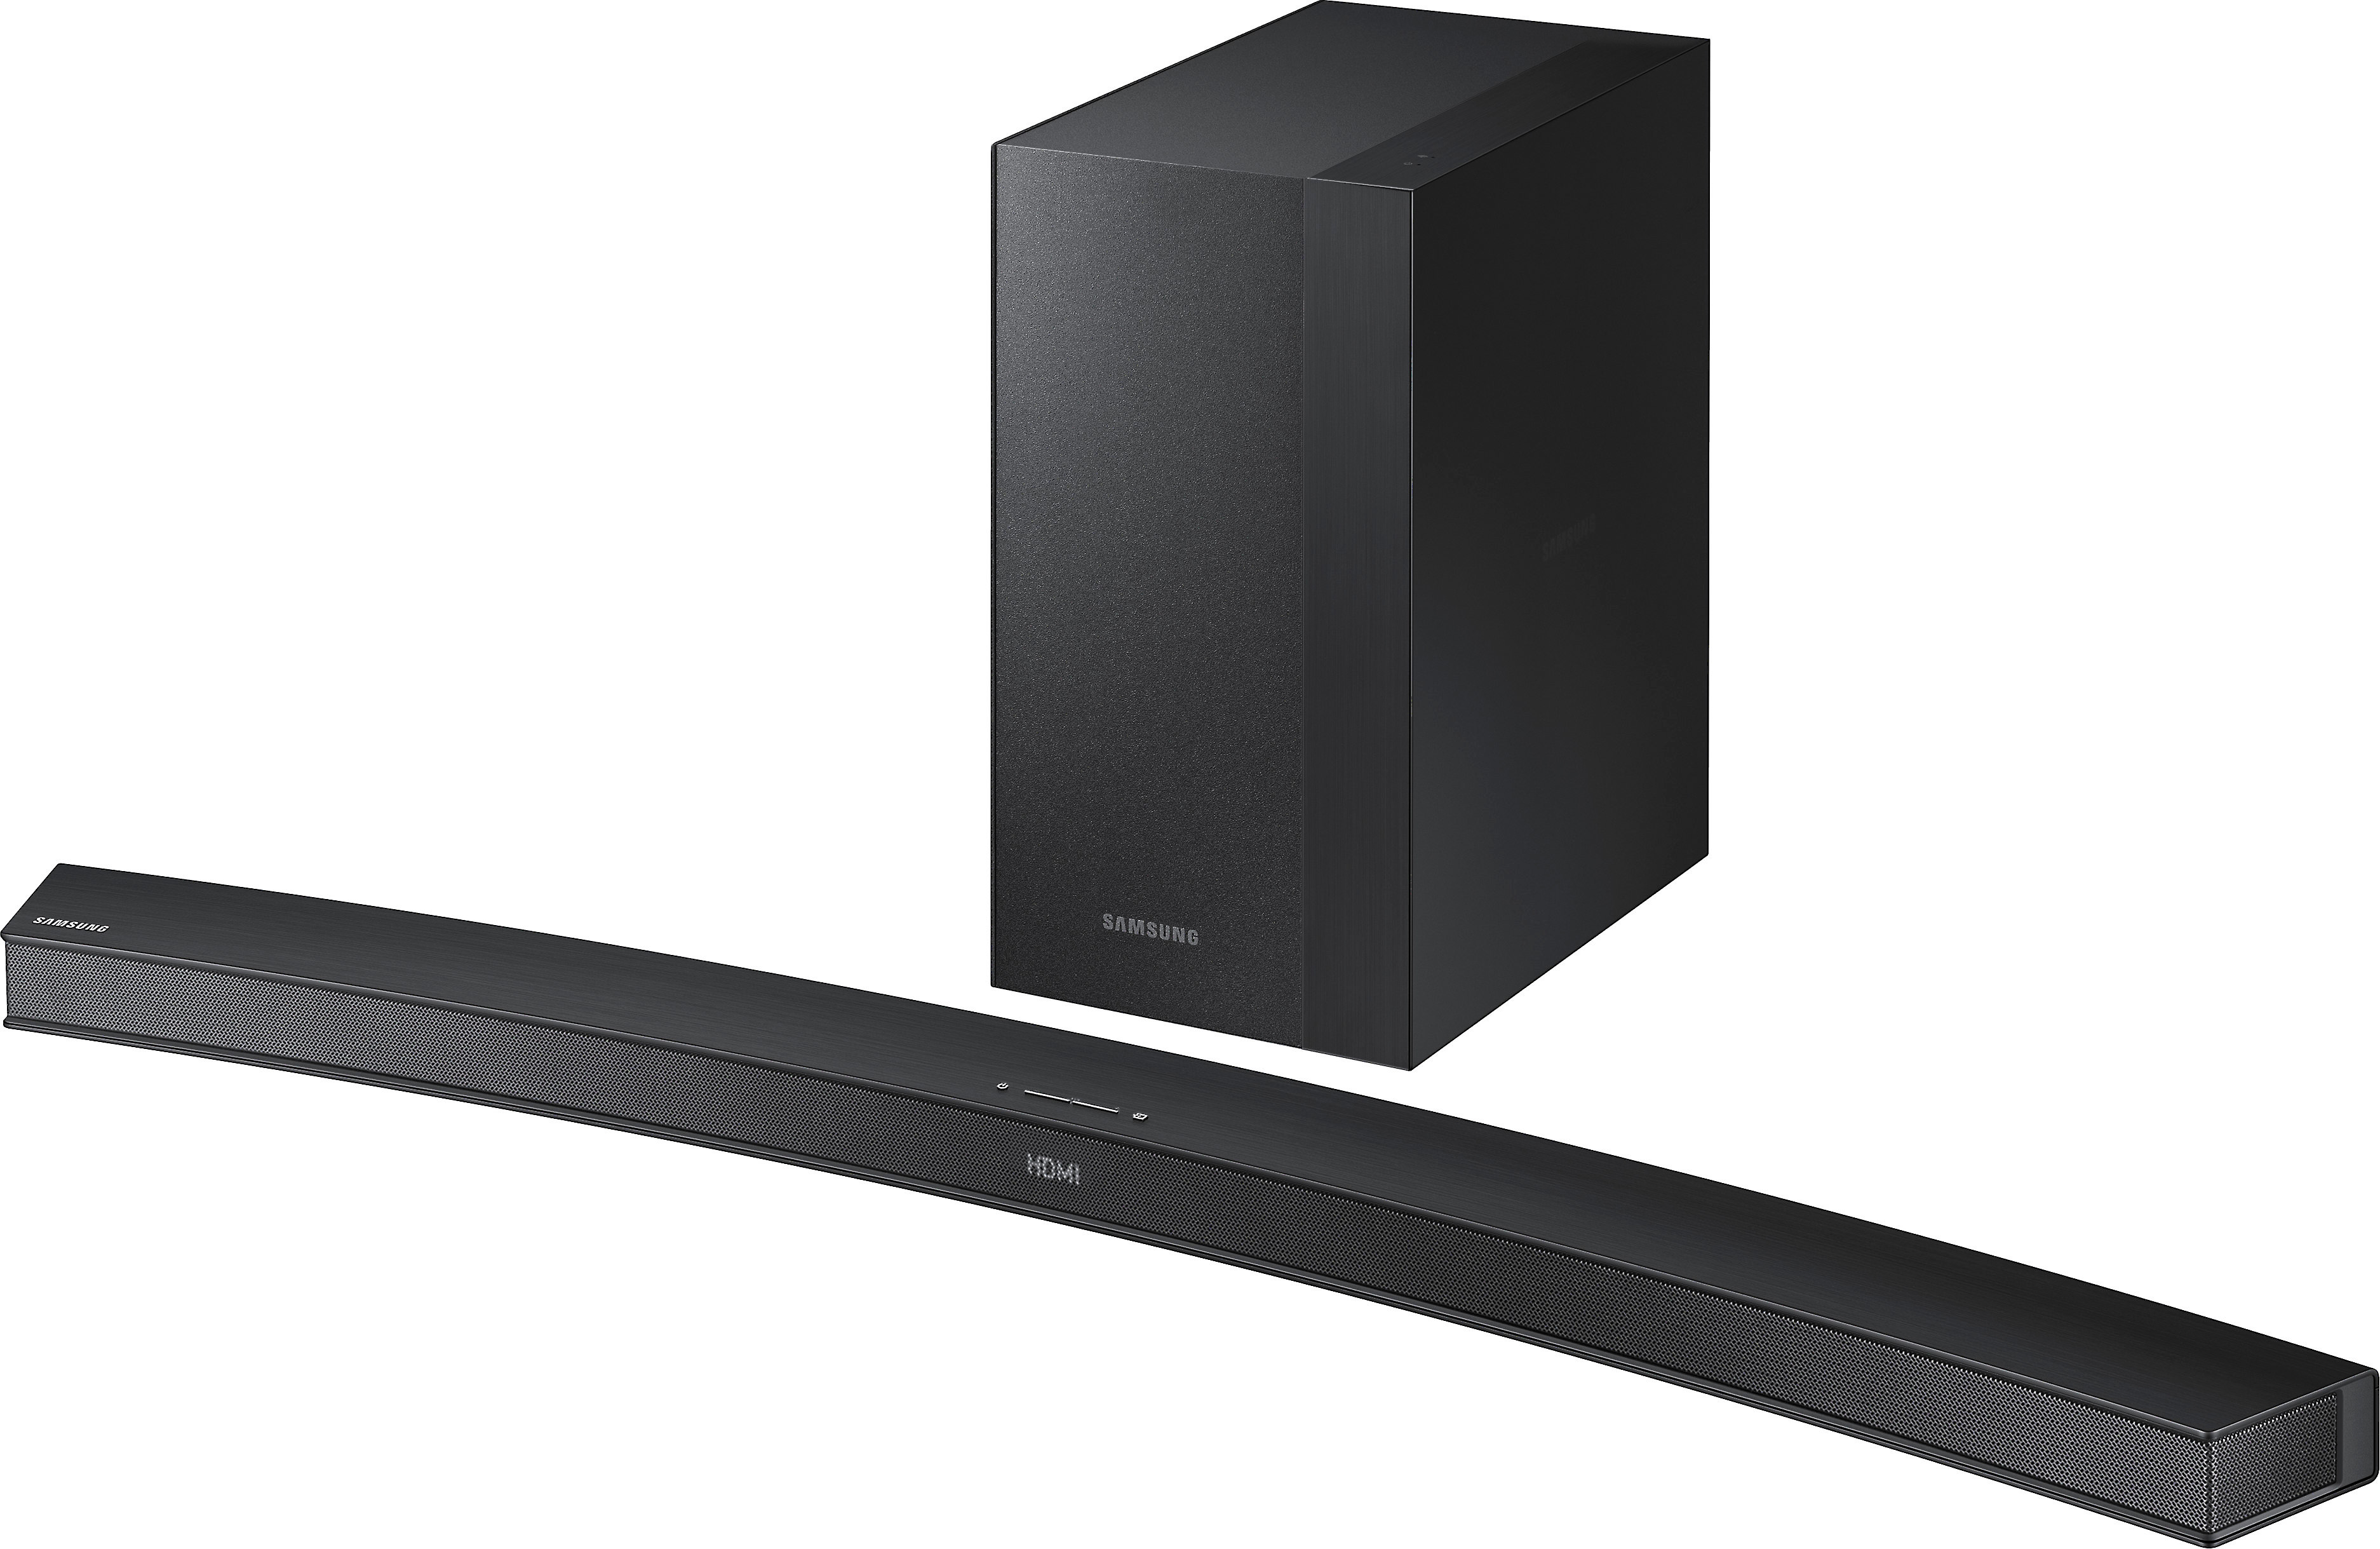 Samsung HW-M4500 Curved, powered home 